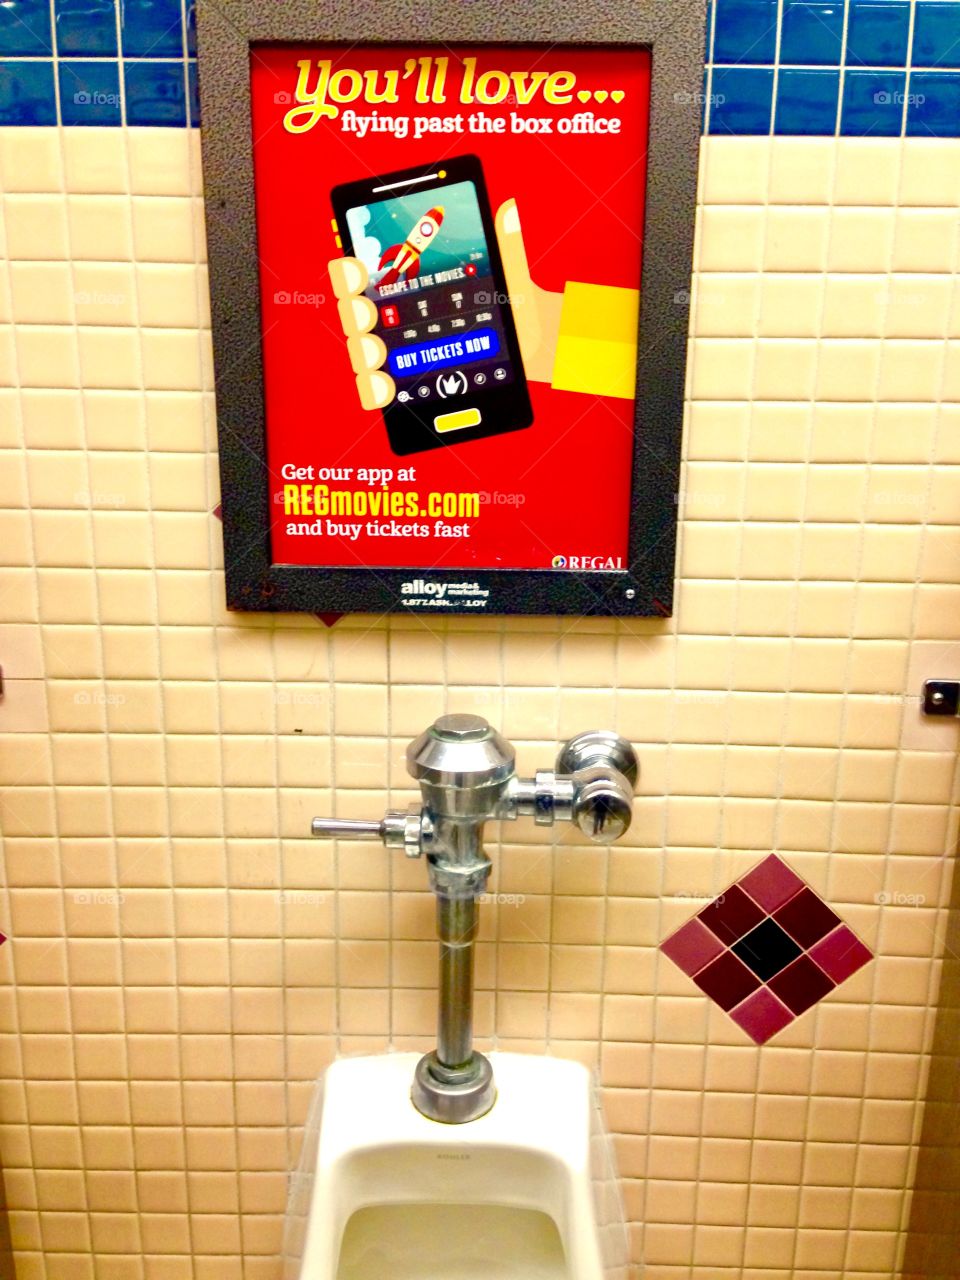 Restroom Movie Poster

Published by:
HappyBrownMonkey 